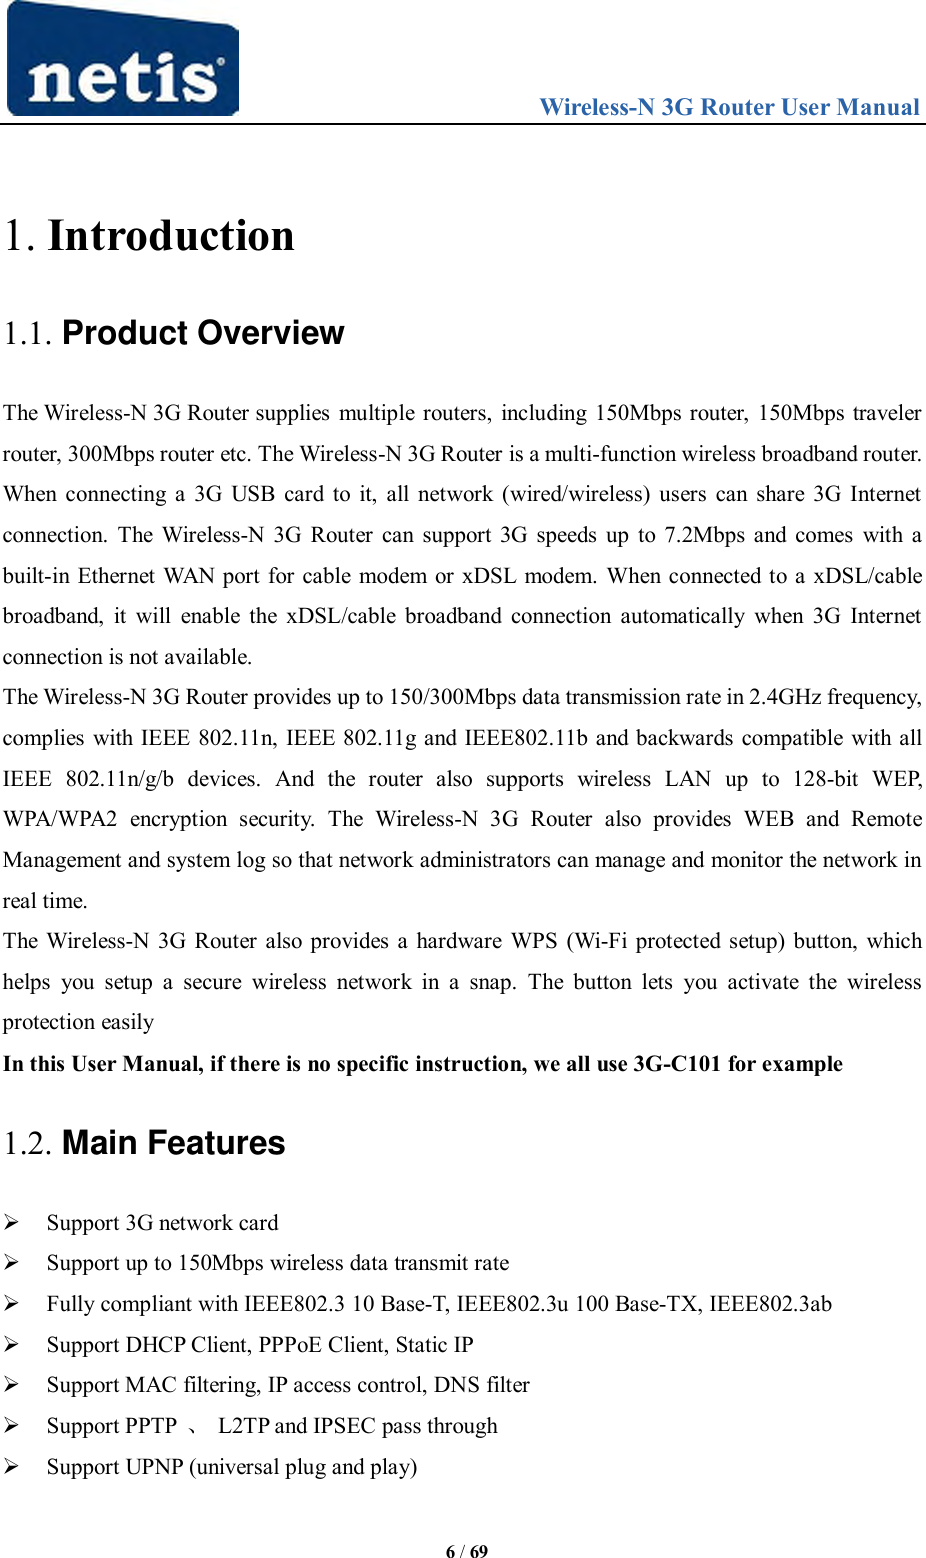                                 Wireless-N 3G Router User Manual  6 / 69  1. Introduction 1.1. Product Overview The Wireless-N 3G Router supplies multiple routers, including 150Mbps router, 150Mbps traveler router, 300Mbps router etc. The Wireless-N 3G Router is a multi-function wireless broadband router. When connecting a 3G USB card to it, all network (wired/wireless) users can share 3G Internet connection. The Wireless-N 3G Router can support 3G speeds up to 7.2Mbps and comes  with a built-in Ethernet WAN port for cable modem or xDSL modem. When connected to a xDSL/cable broadband,  it will  enable  the  xDSL/cable  broadband connection  automatically when 3G  Internet connection is not available. The Wireless-N 3G Router provides up to 150/300Mbps data transmission rate in 2.4GHz frequency, complies with IEEE 802.11n, IEEE 802.11g and IEEE802.11b and backwards compatible with all IEEE  802.11n/g/b  devices.  And  the  router  also  supports  wireless  LAN  up  to  128-bit  WEP, WPA/WPA2  encryption  security.  The  Wireless-N  3G  Router  also  provides  WEB  and  Remote Management and system log so that network administrators can manage and monitor the network in real time. The Wireless-N 3G Router also provides a hardware WPS (Wi-Fi protected setup) button, which helps  you  setup  a  secure  wireless  network  in  a  snap.  The  button  lets  you  activate  the  wireless protection easily In this User Manual, if there is no specific instruction, we all use 3G-C101 for example 1.2. Main Features  Support 3G network card  Support up to 150Mbps wireless data transmit rate  Fully compliant with IEEE802.3 10 Base-T, IEEE802.3u 100 Base-TX, IEEE802.3ab   Support DHCP Client, PPPoE Client, Static IP  Support MAC filtering, IP access control, DNS filter  Support PPTP  、  L2TP and IPSEC pass through  Support UPNP (universal plug and play) 